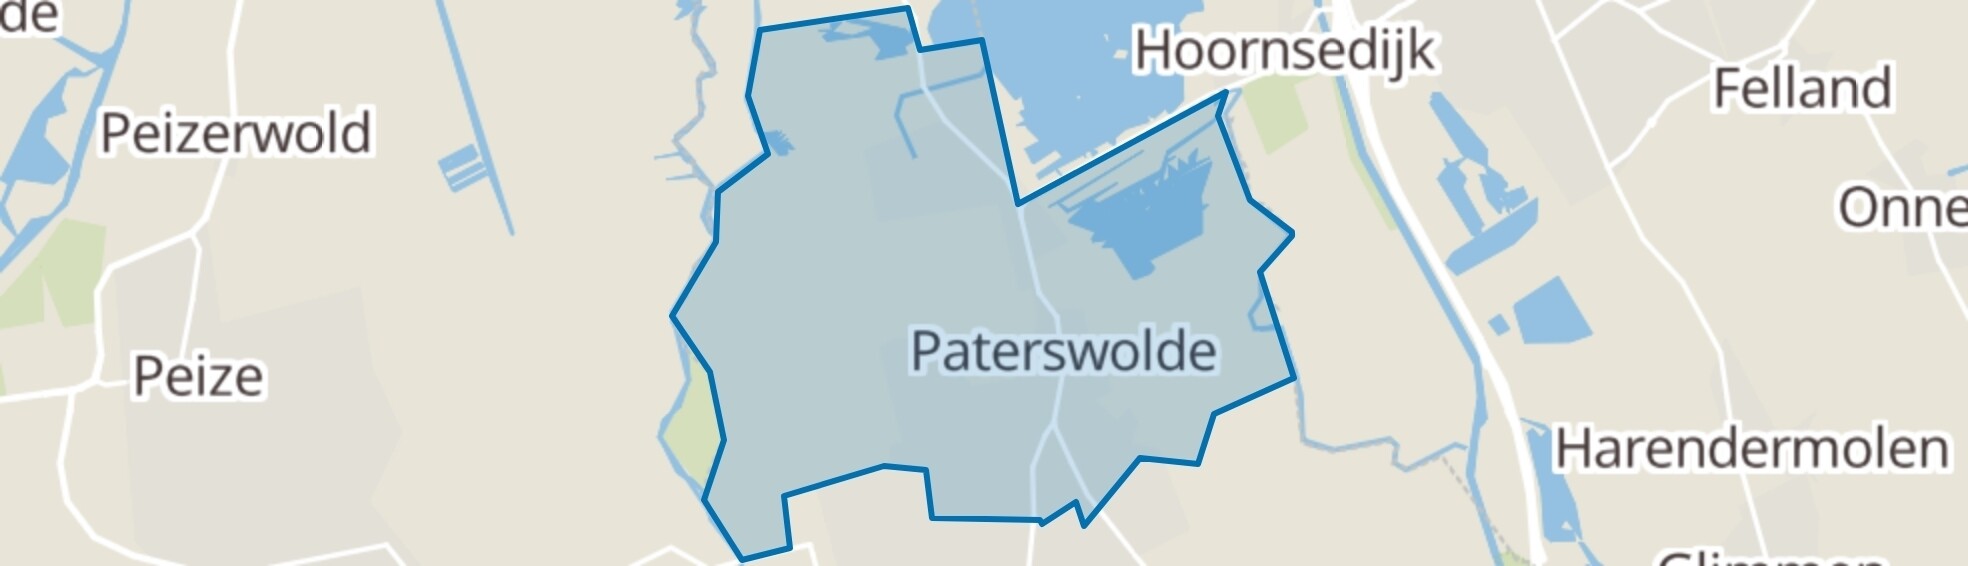 Paterswolde